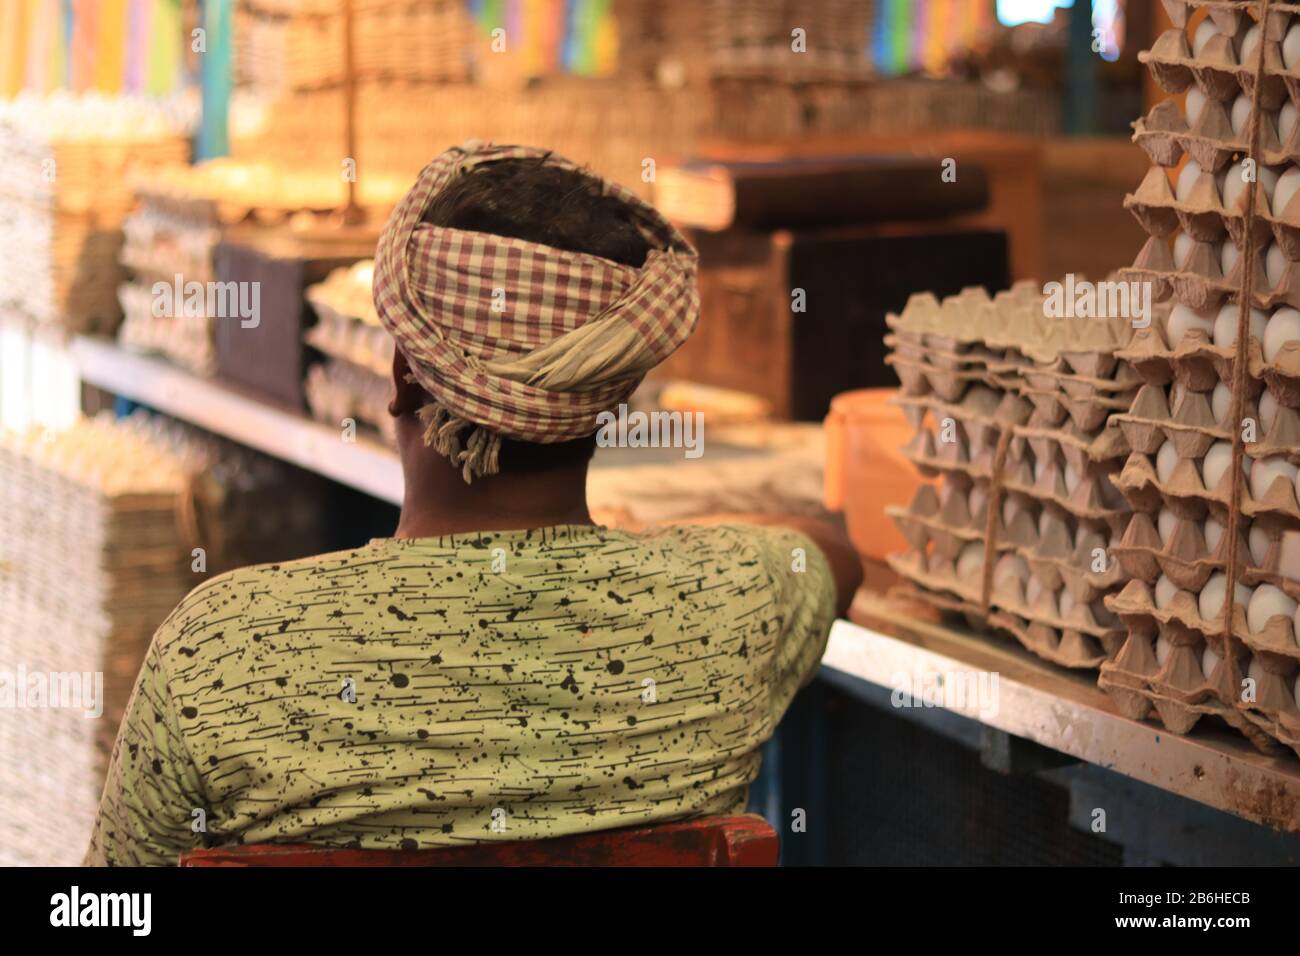 A man sits next to crates of eggs inside Hogg Market Stock Photo